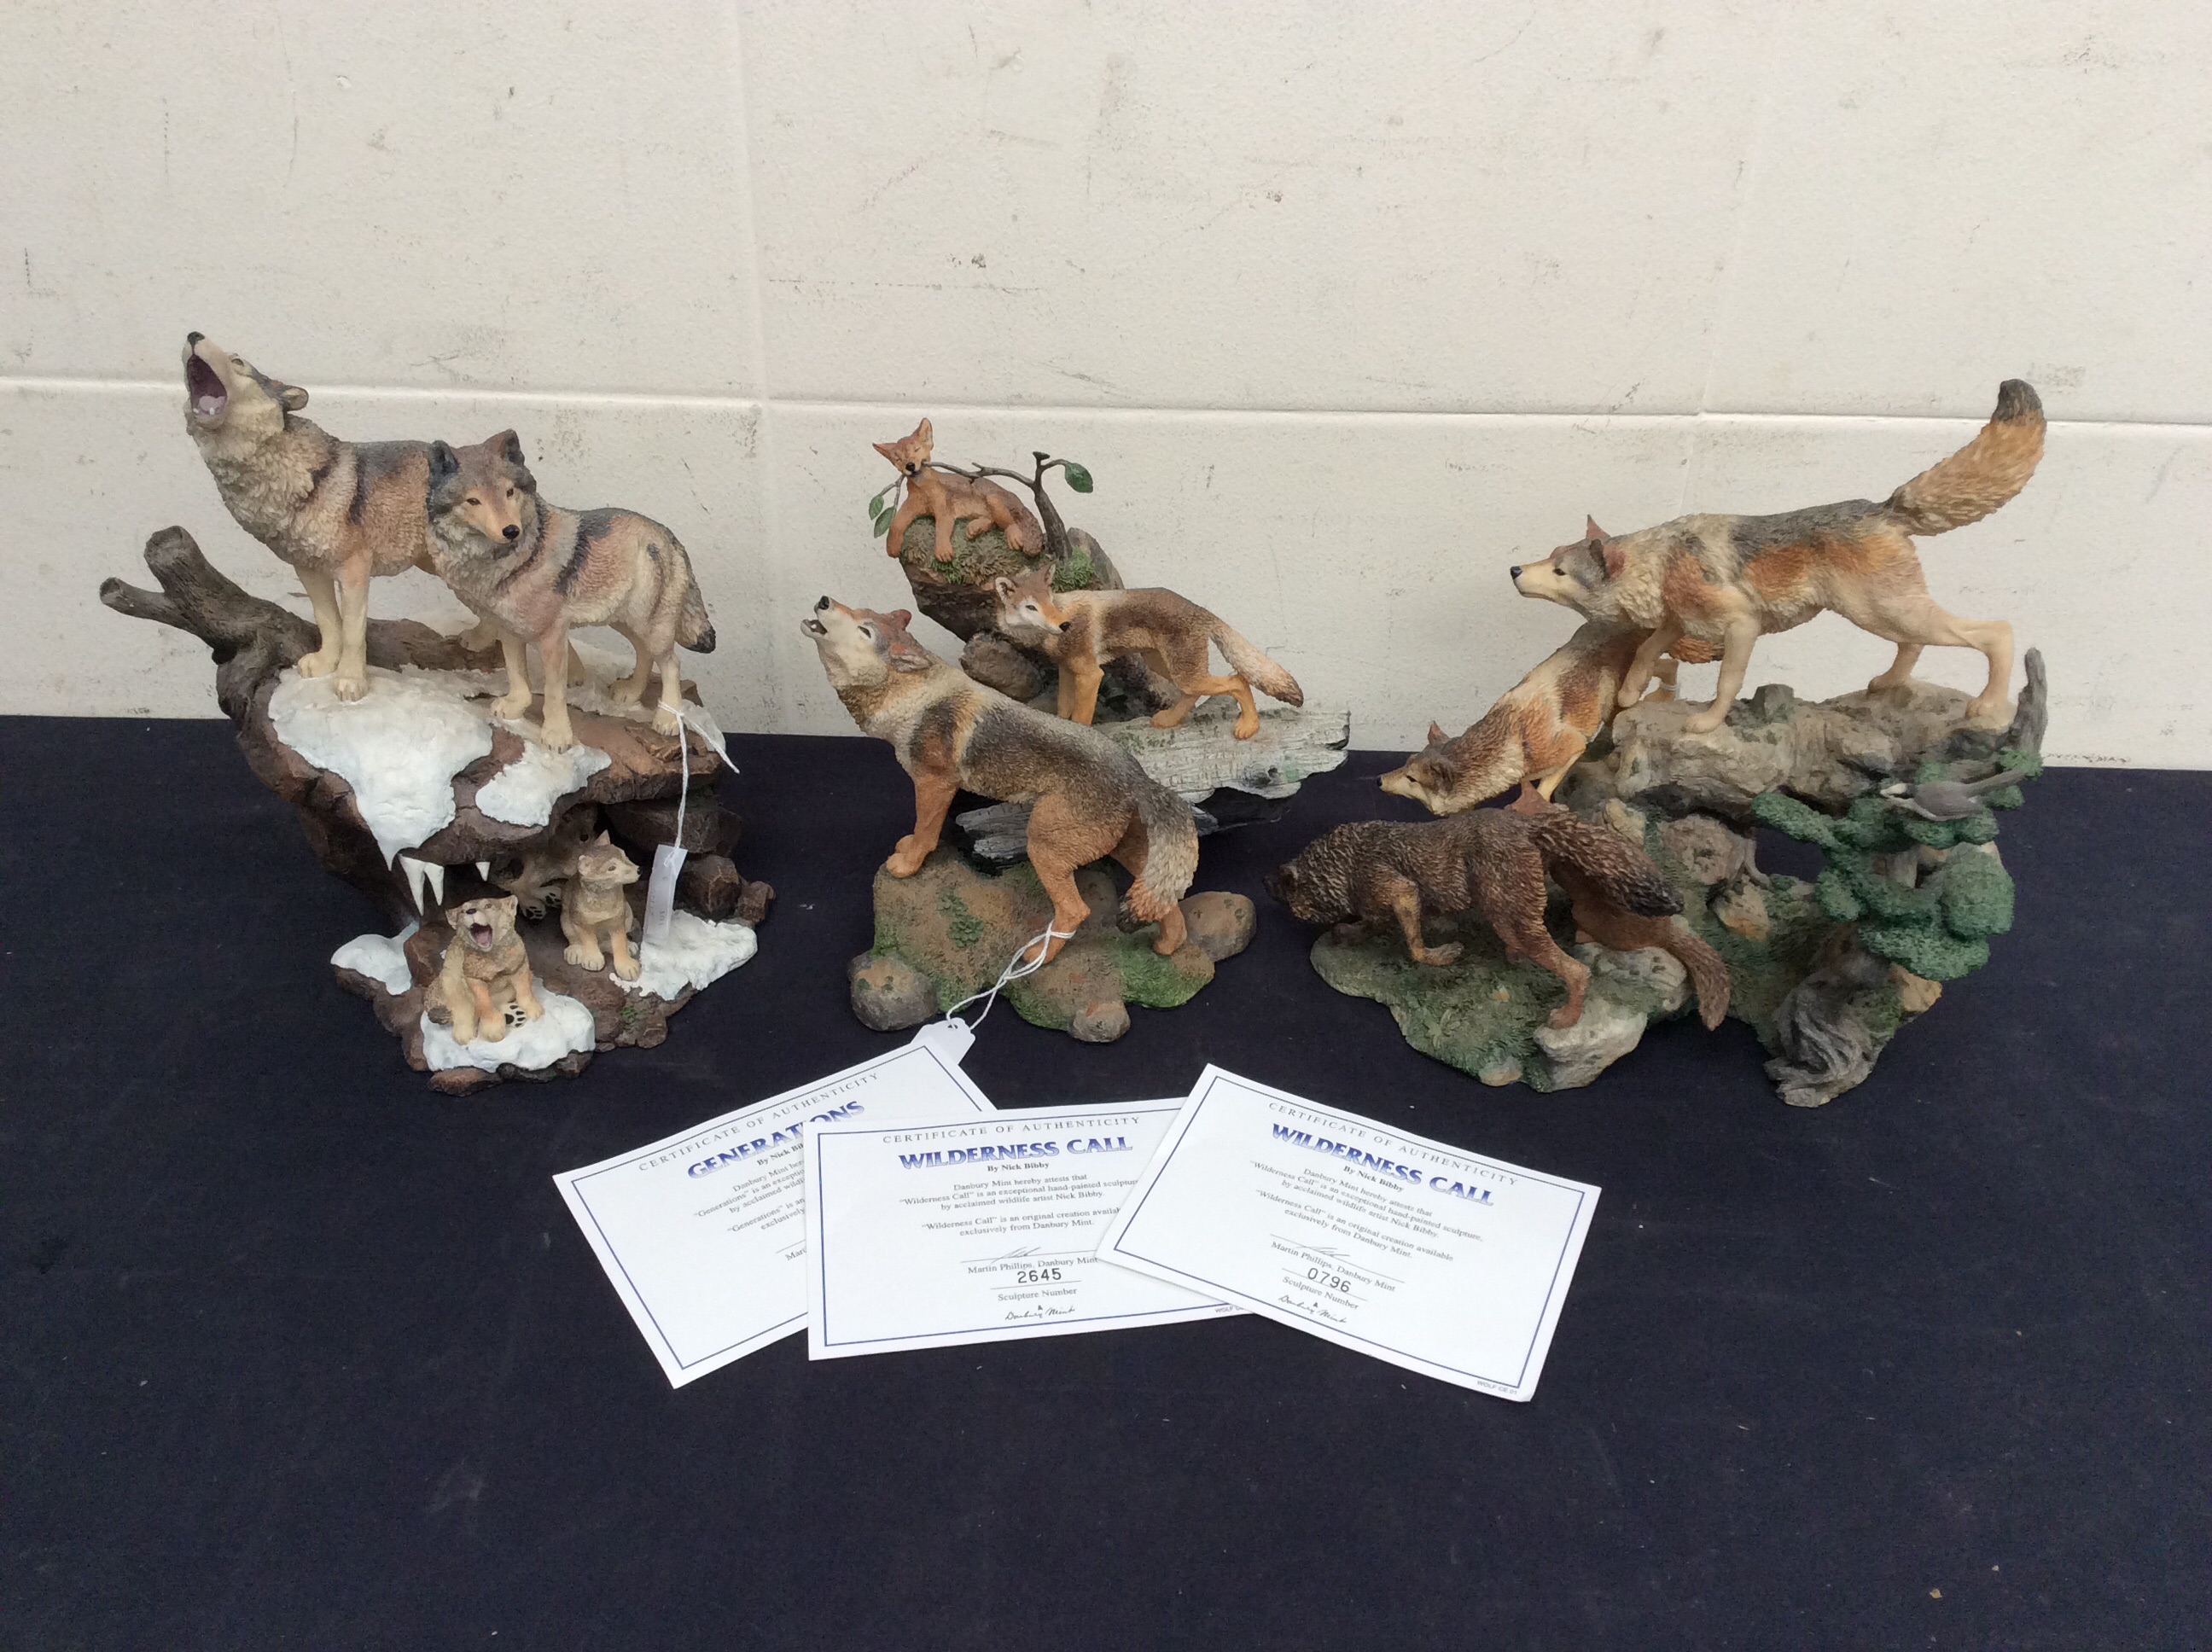 Three resin figures of wolves "Wilderness Calls" Danbury mint, all with certificates.